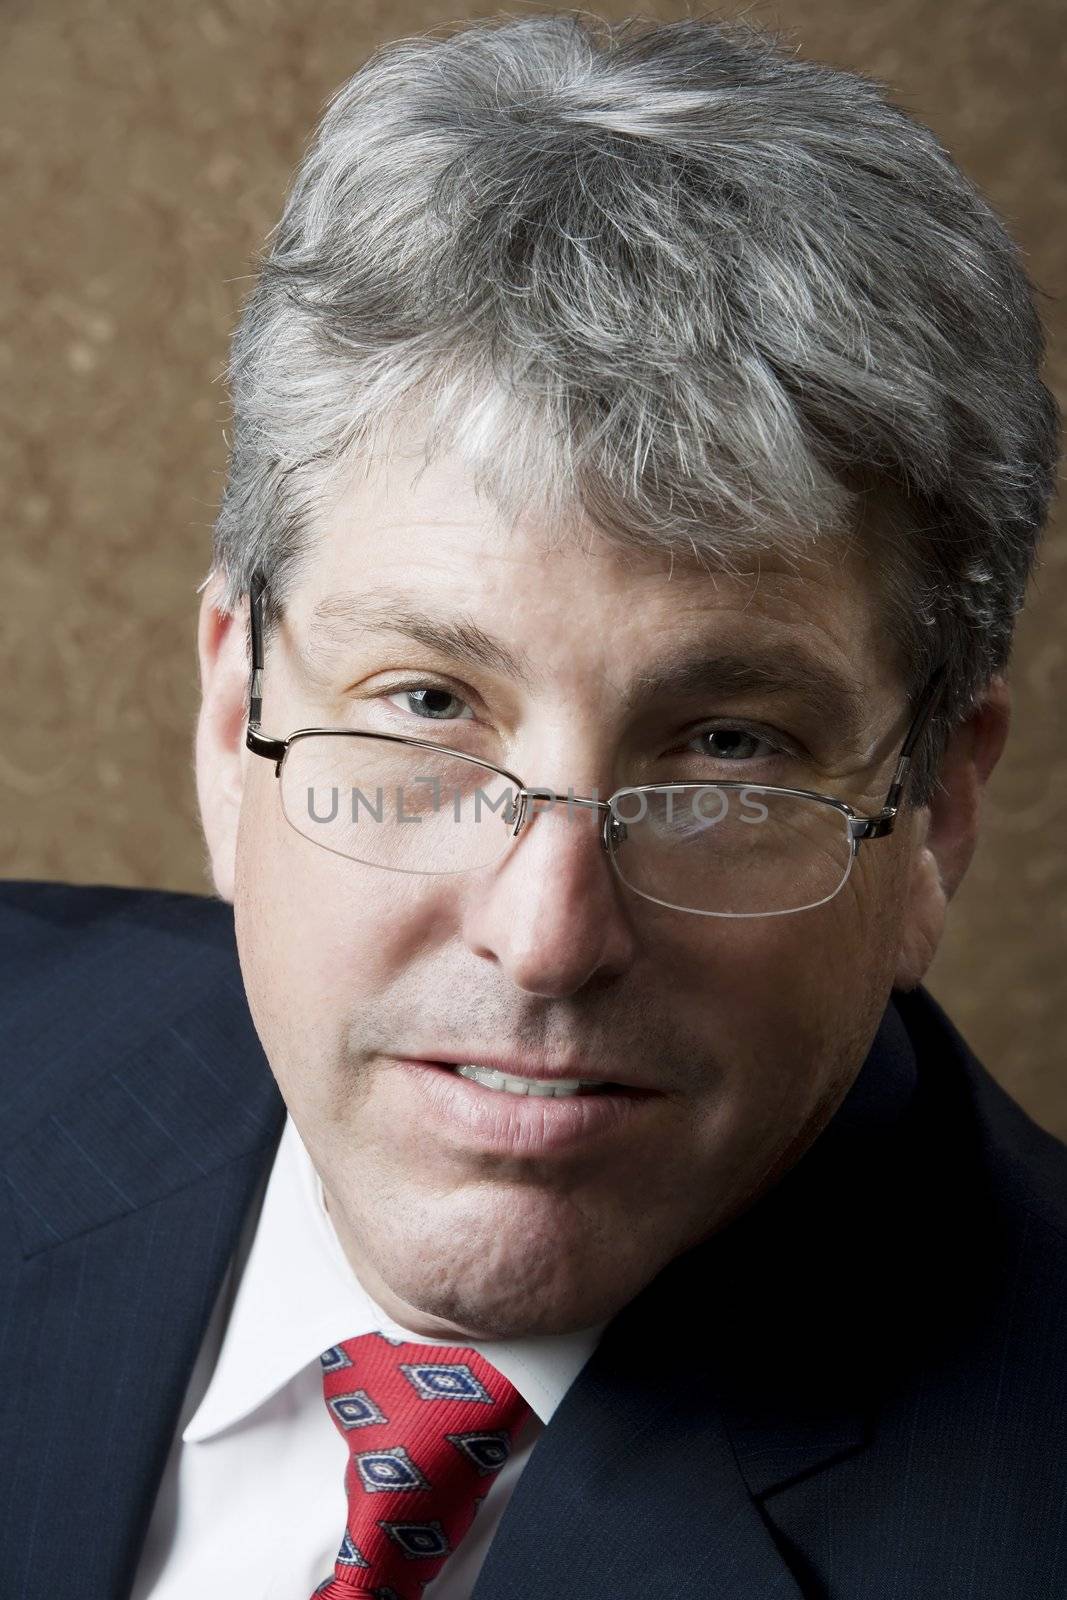 Corporate executive looking over glasses in front of a gold background